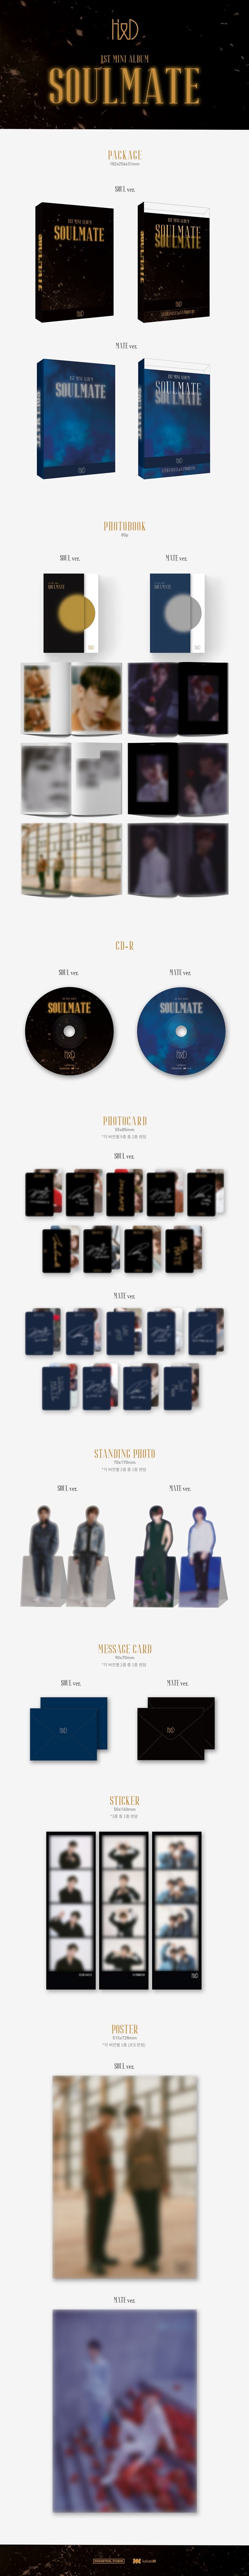 1 CD
1 Photo Book (80 pages)
2 Photo Cards
1 Standing Photo
1 Message Card
1 Sticker